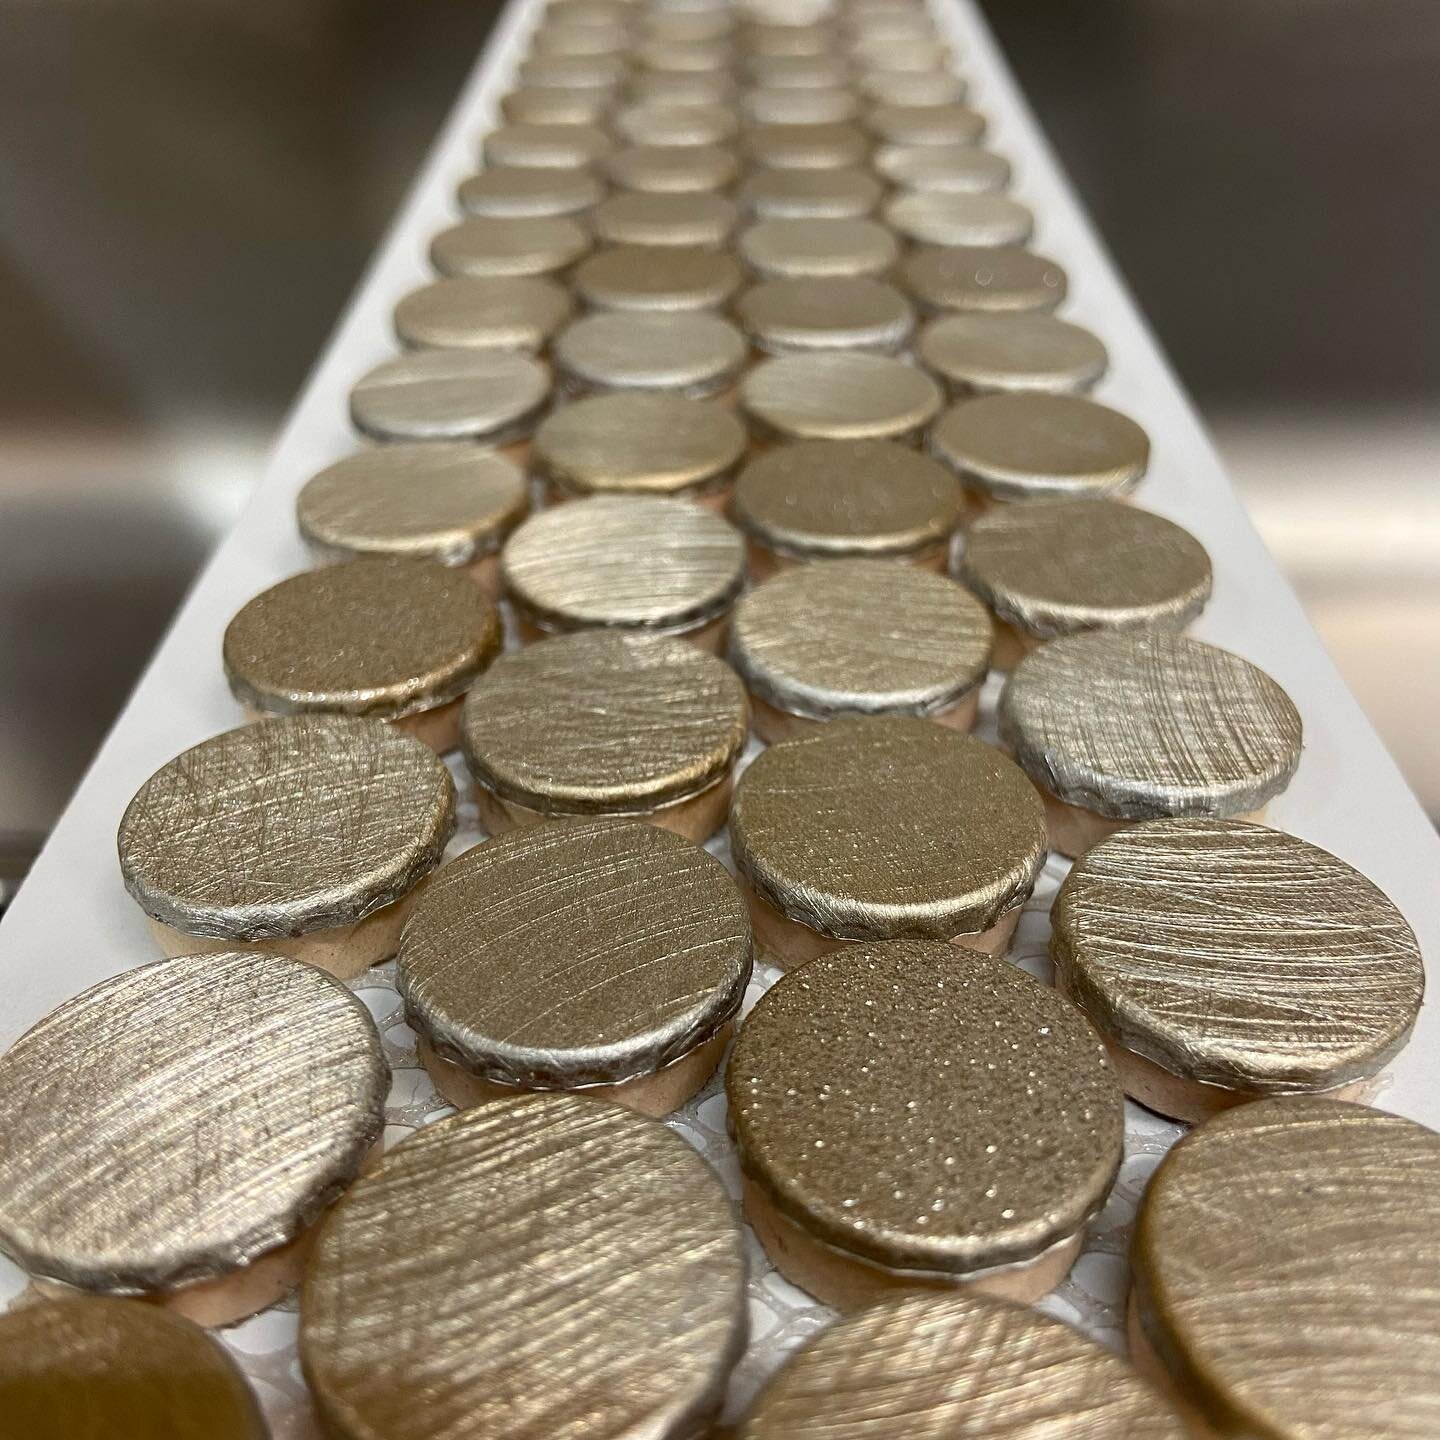 Metallic penny rounds. Come in today to take a look at Mosaicos Jalisco!
1513 N Pulaski Rd
Chicago, IL 60651
773-276-8388

#tile #tiles #mosaic #porcelaintiles #walltiles #walltile #backsplash #chicago #humboldtpark #logansquare #familyowned #tilesto